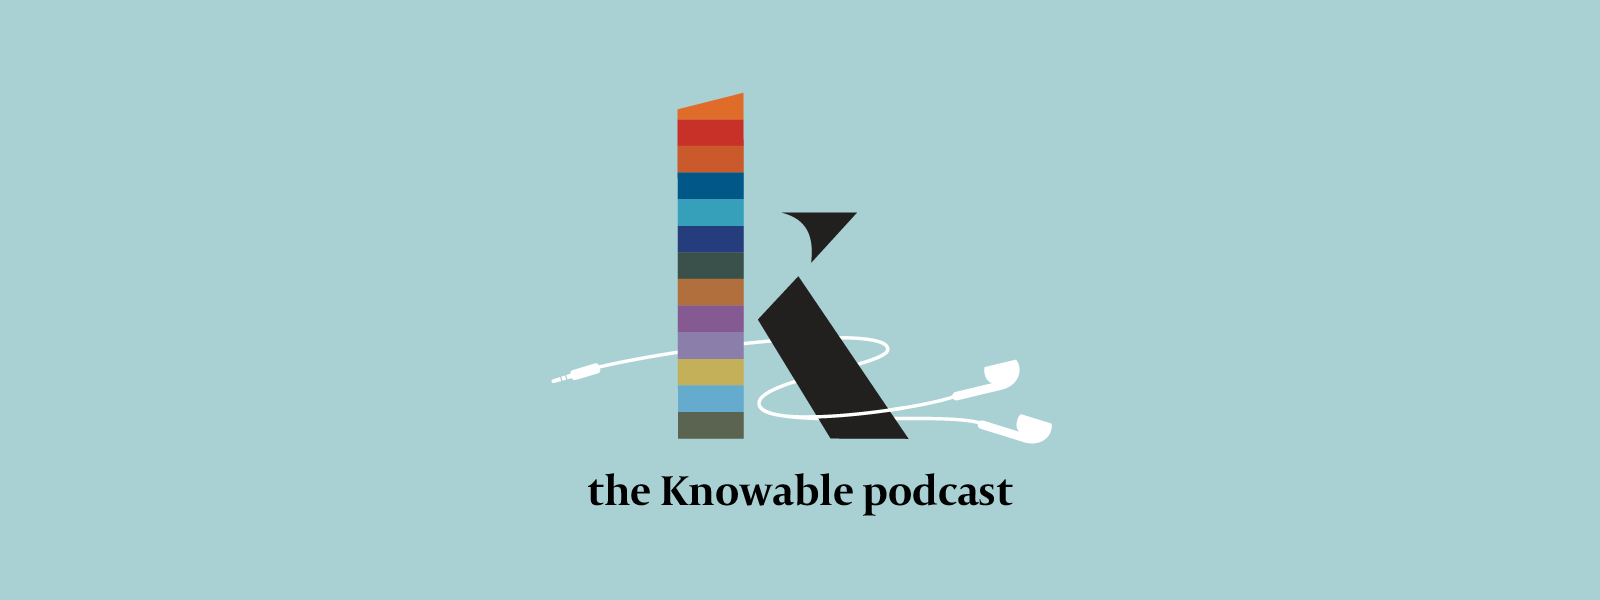 The Knowable podcast